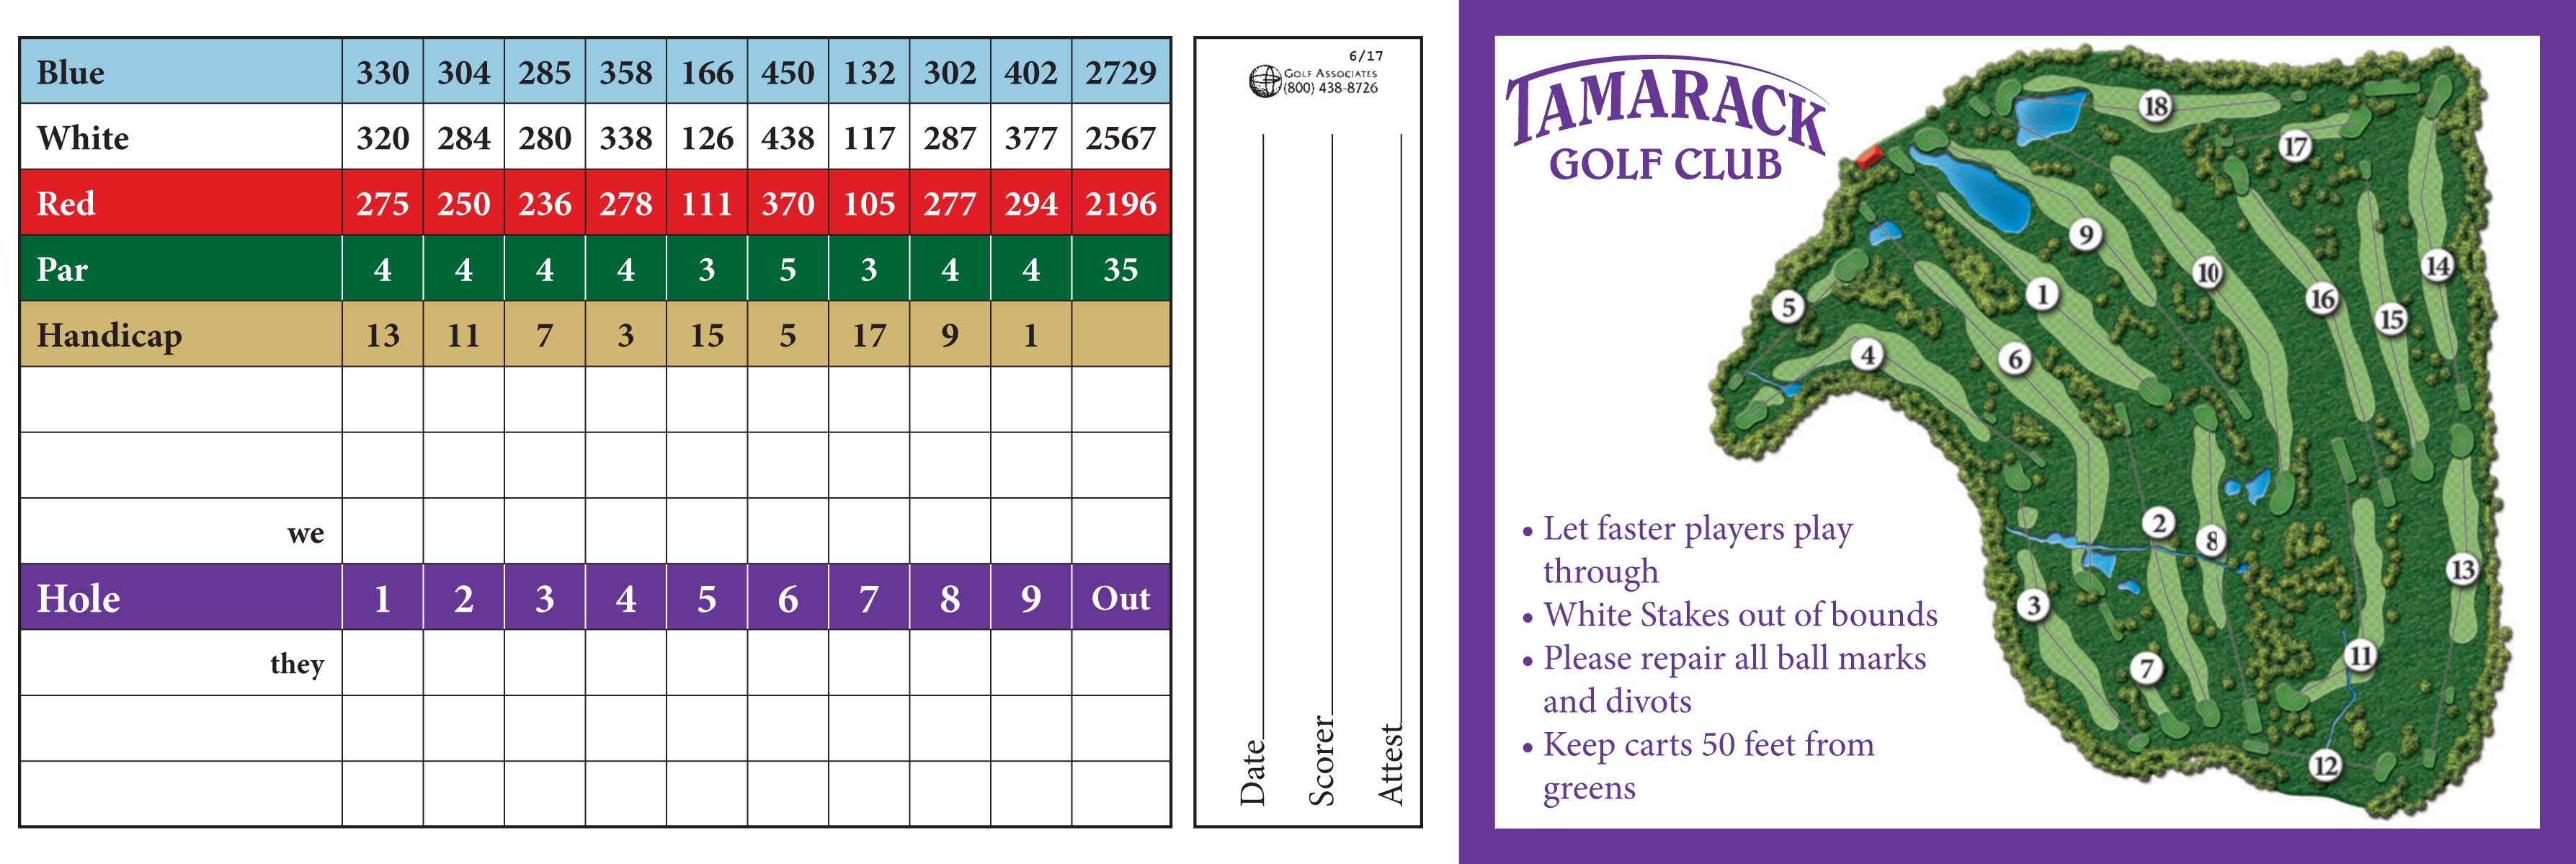 Image of the front of the score card at Tamarack Golf Club in Oswego, NY.